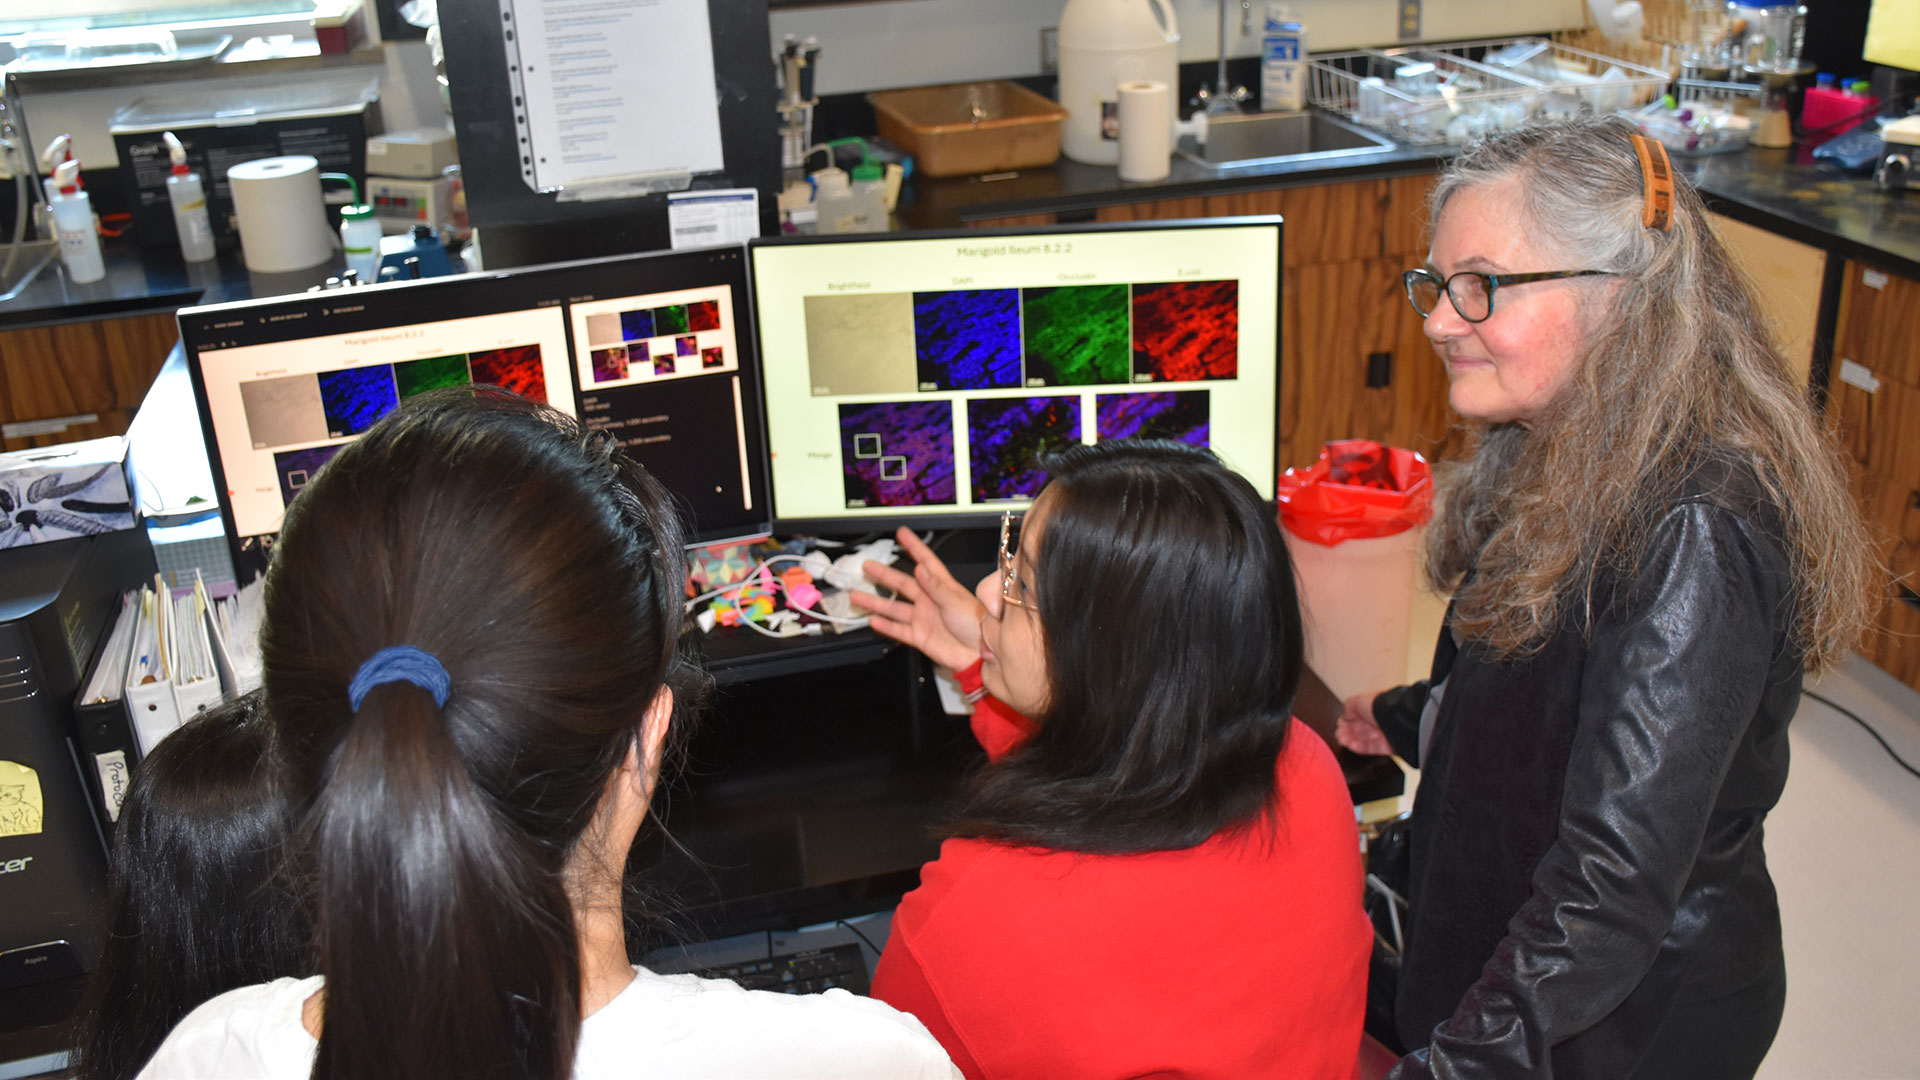 Members of the research team look at images of bacteria.